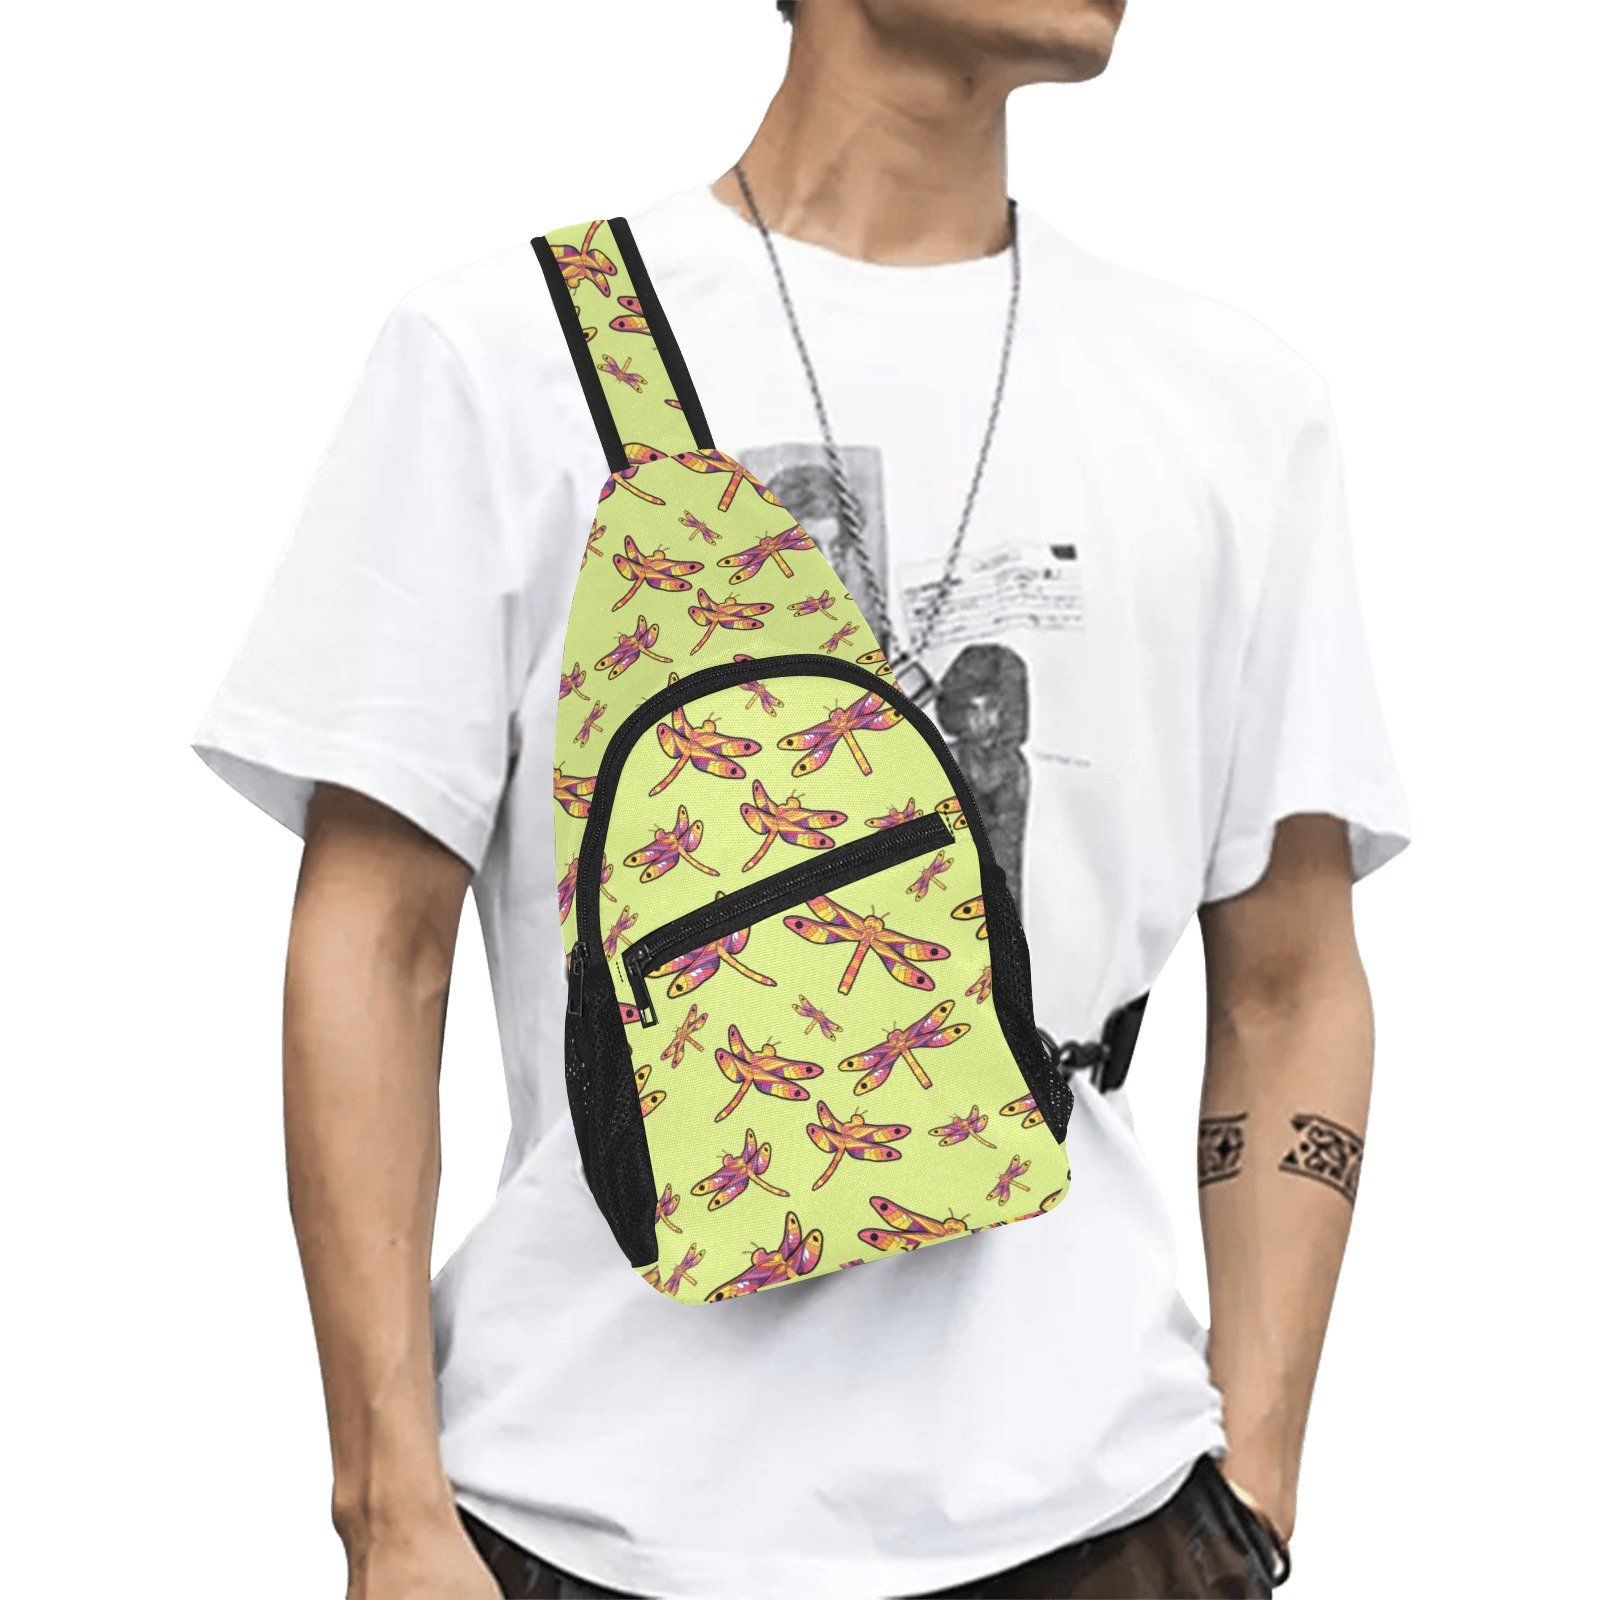 Gathering Lime All Over Print Chest Bag (Model 1719) All Over Print Chest Bag (1719) e-joyer 